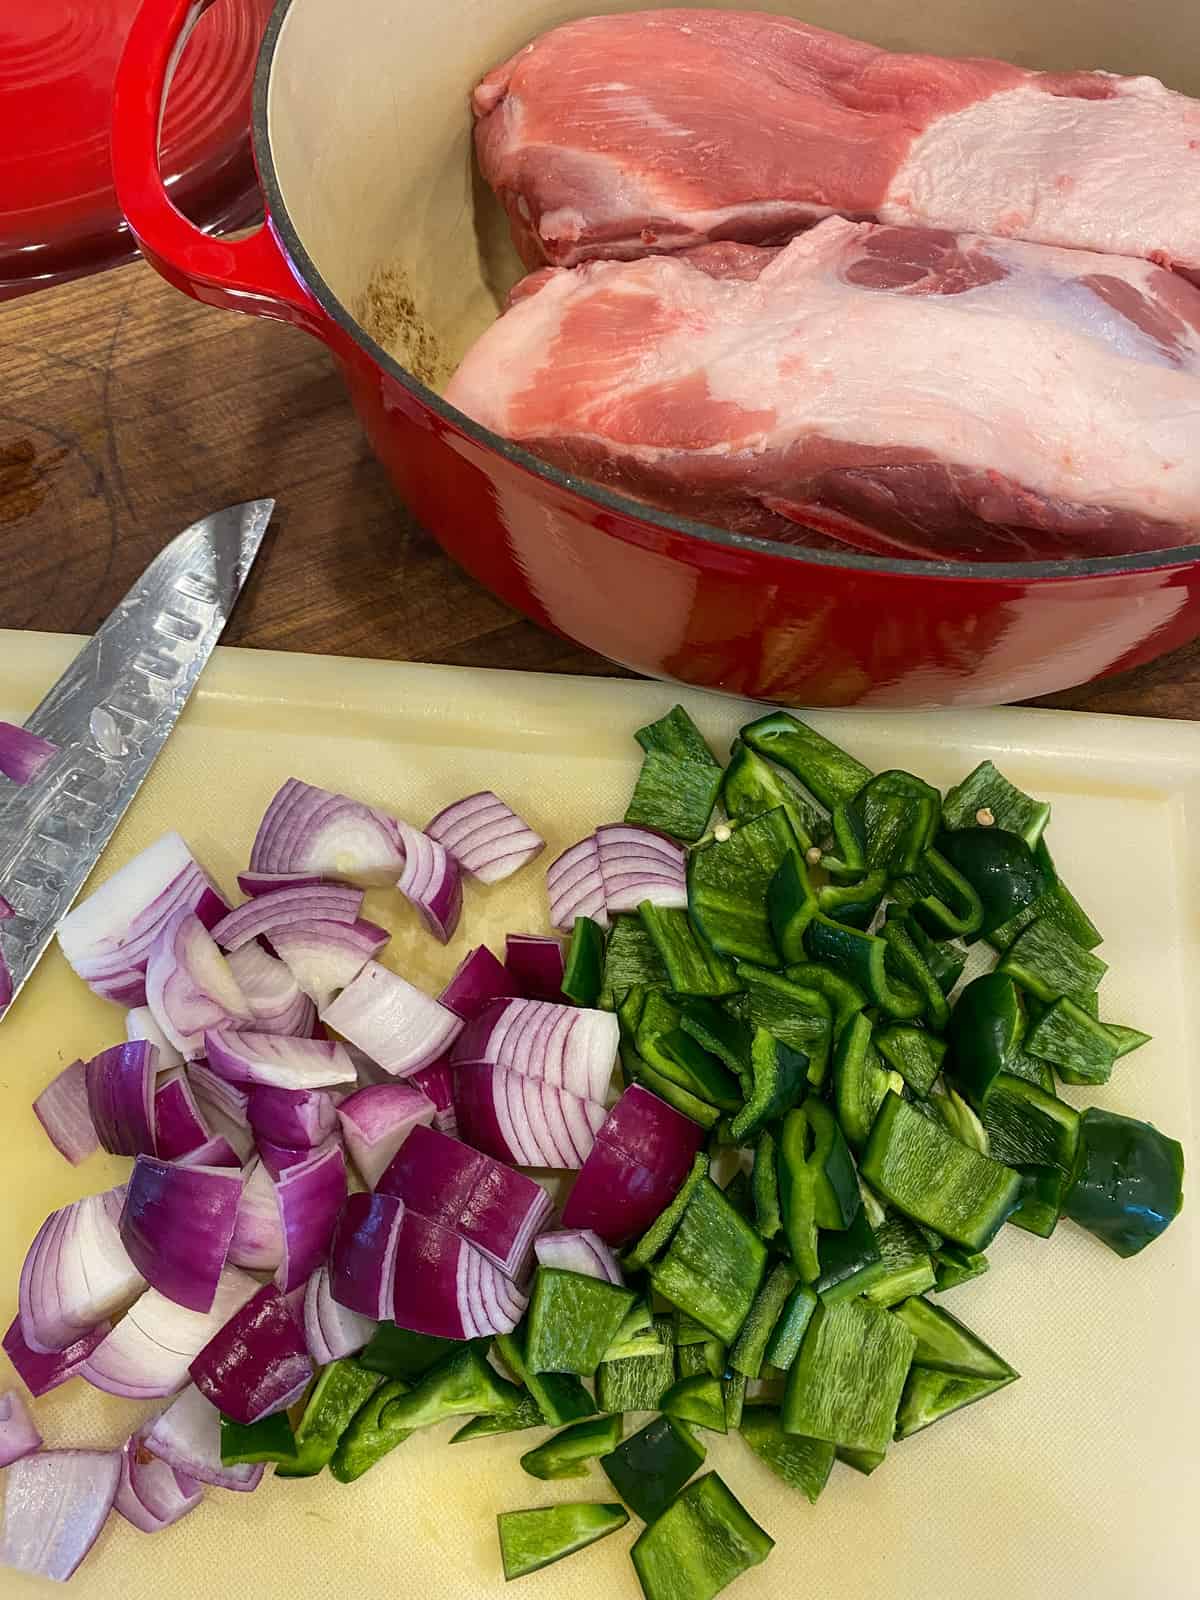 Raw pork roast with chopped onion and pepper.